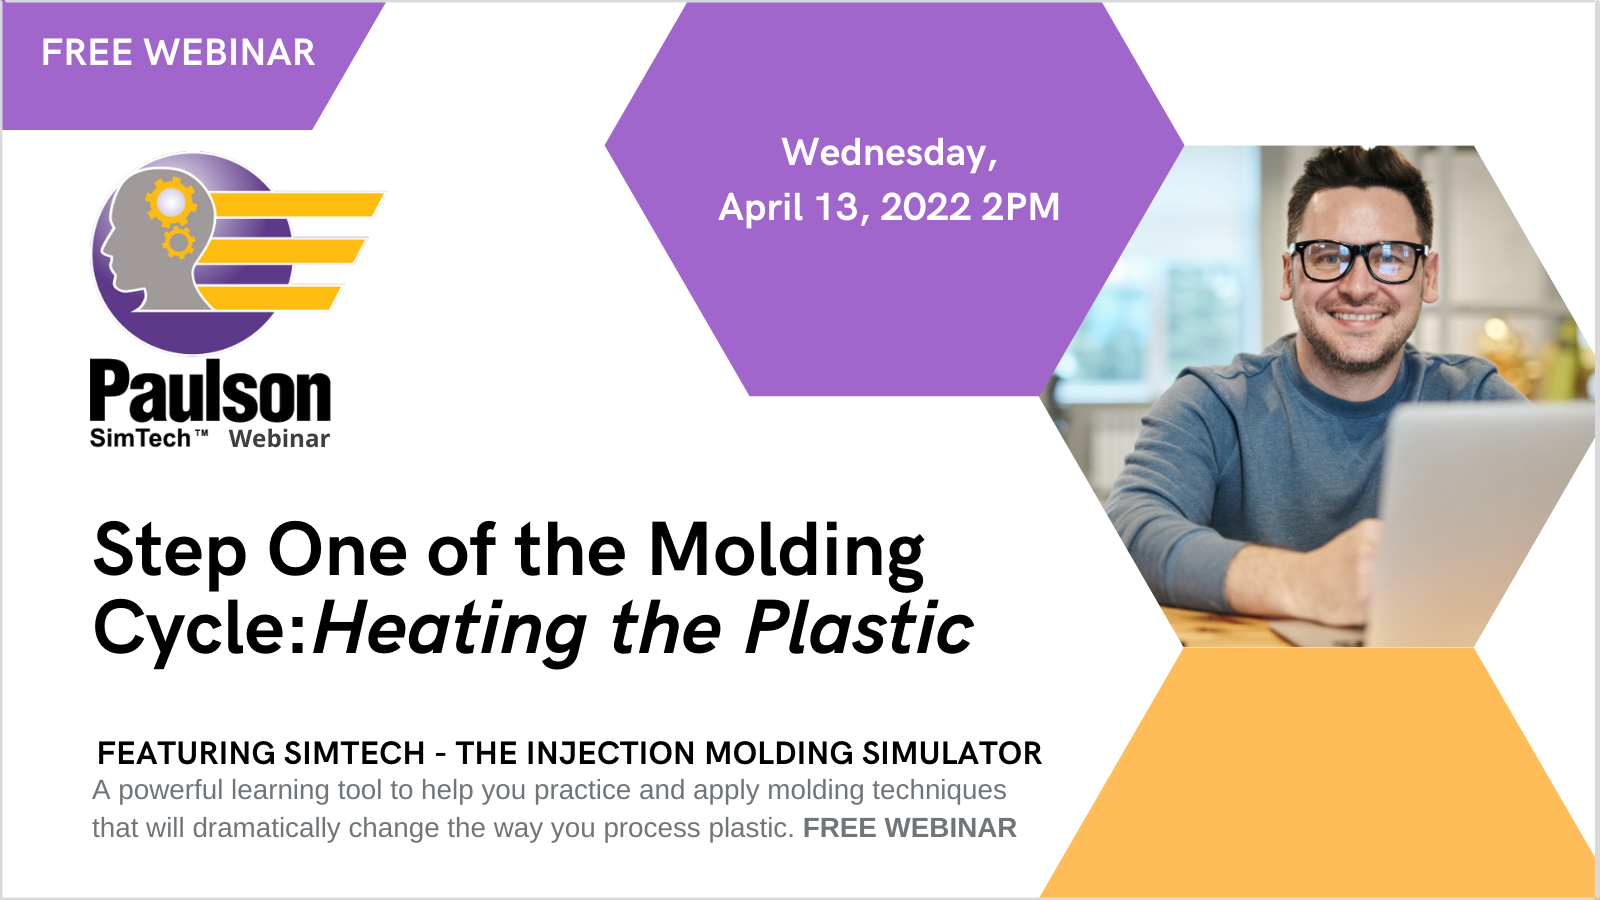 Webinar: Step One of the Molding Cycle, Heating the Plastic